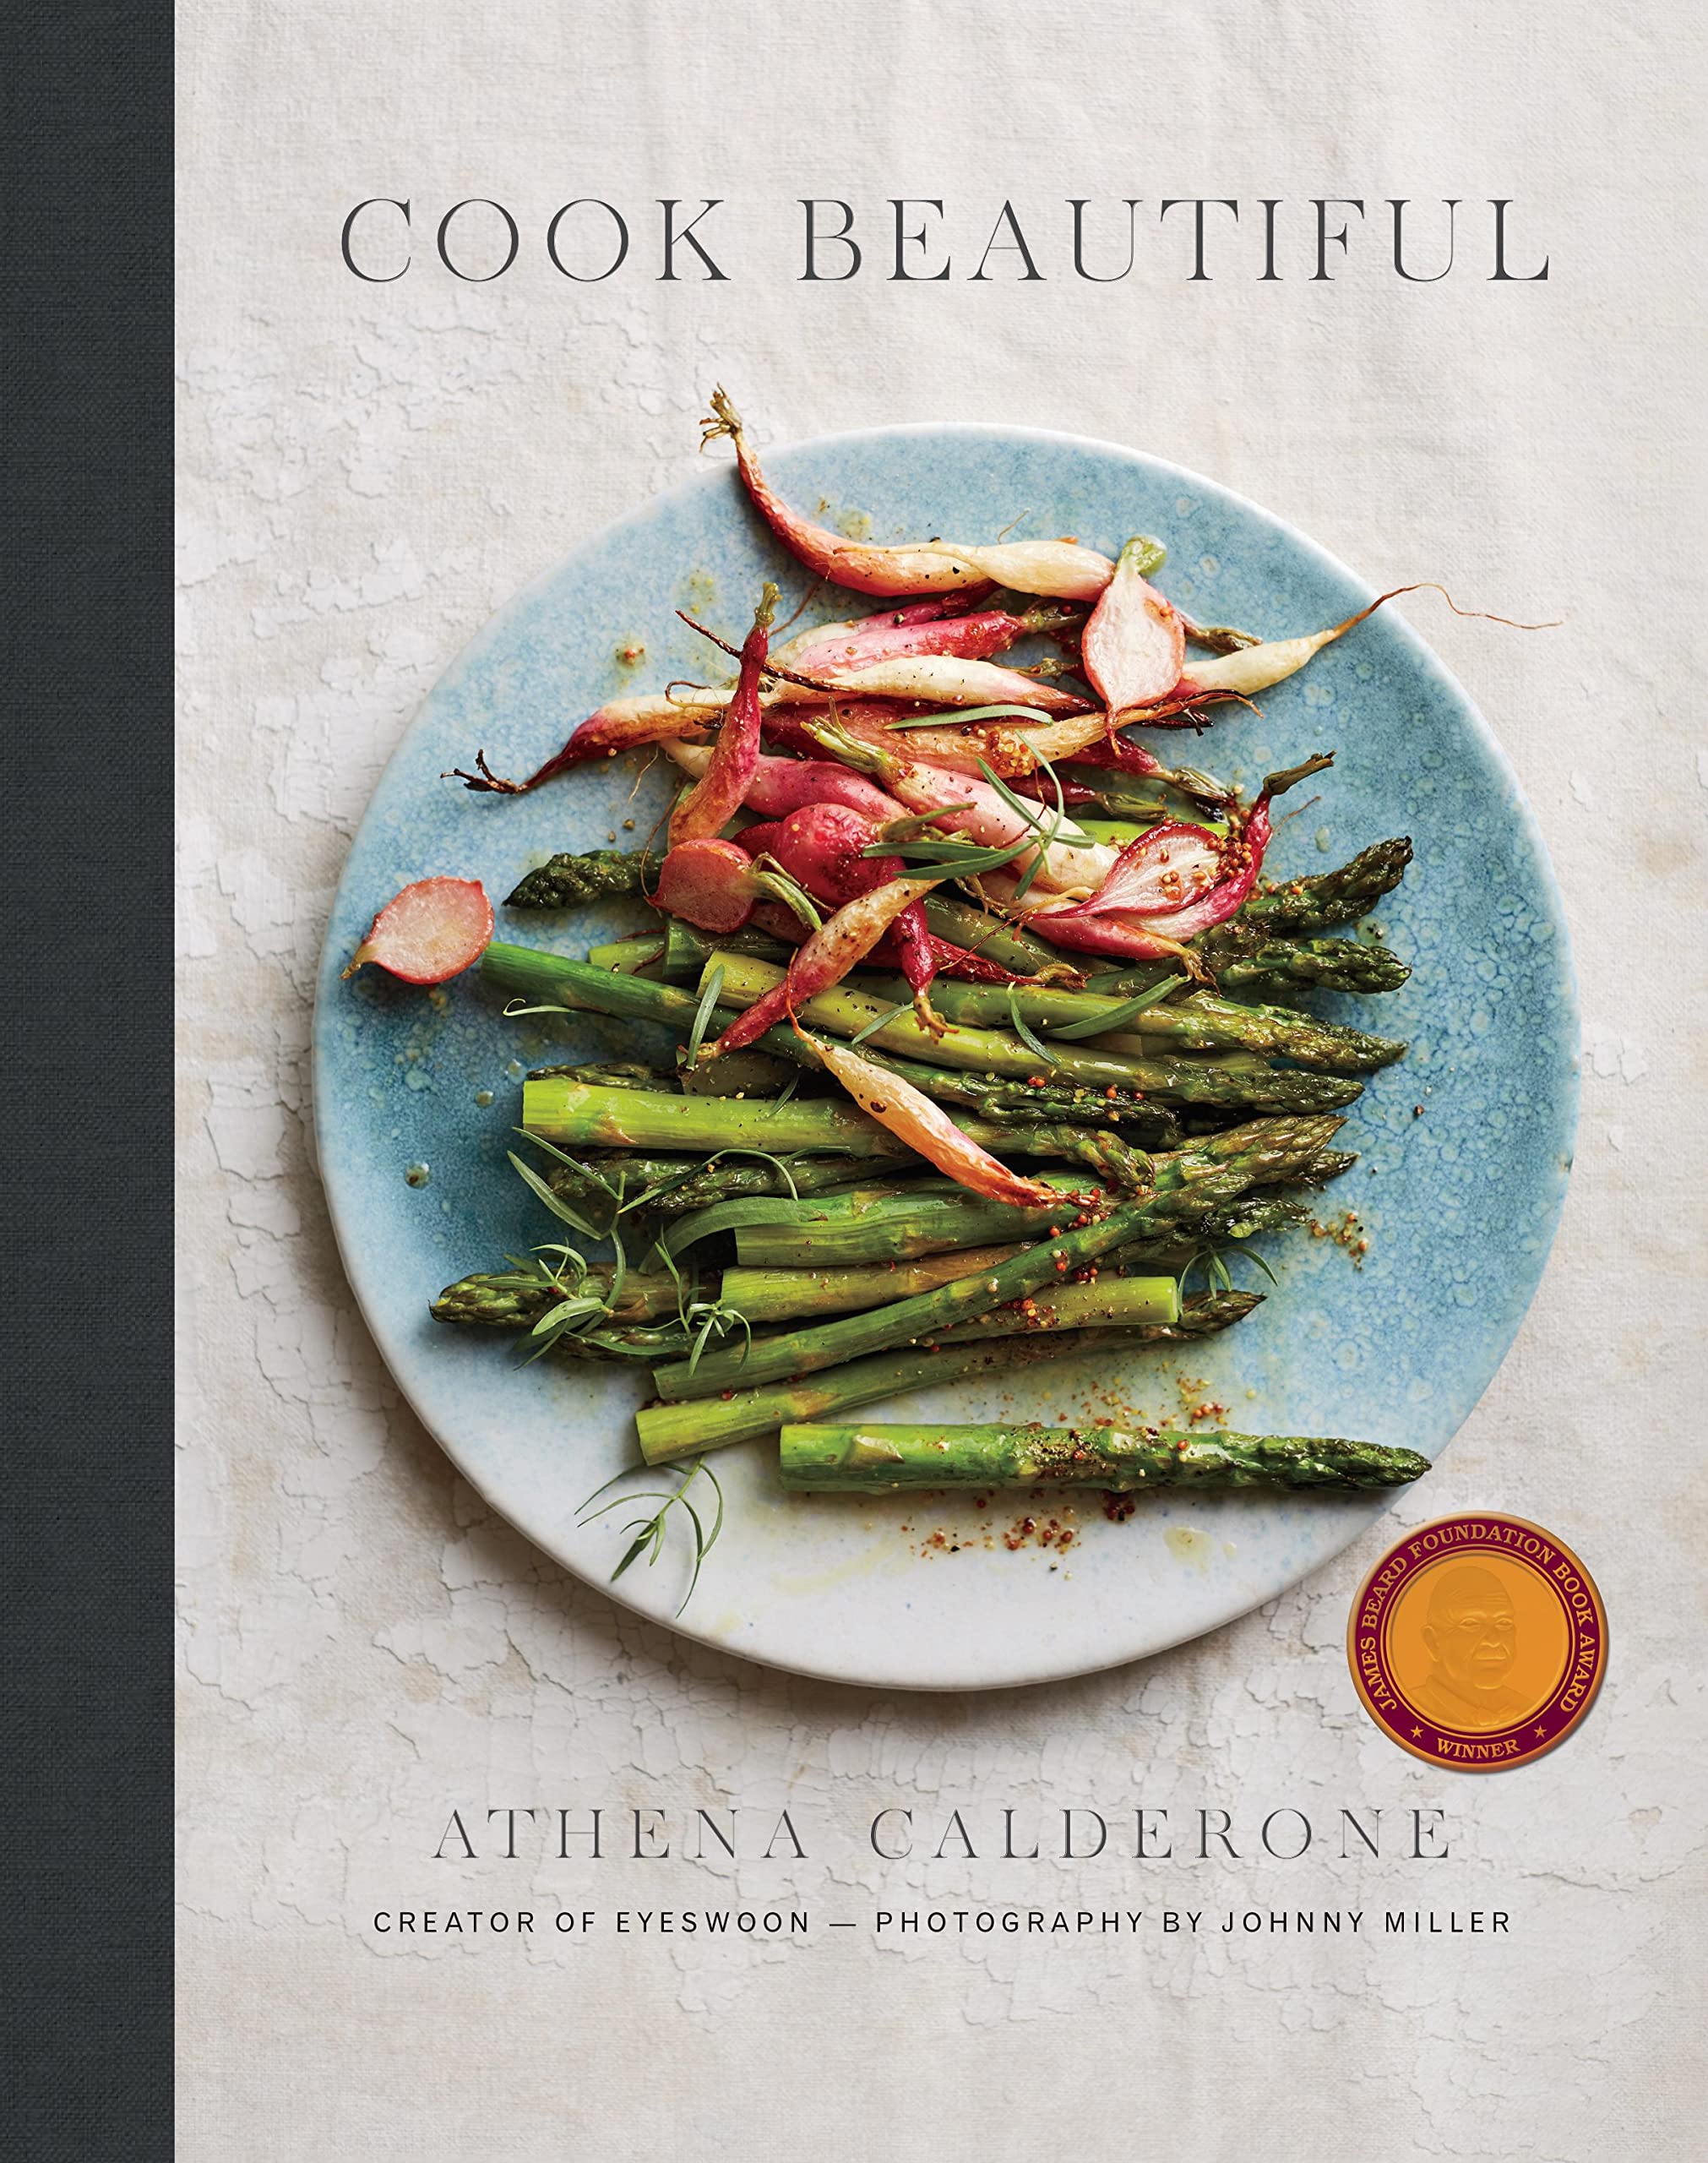 Cook Beautiful: Delicious Recipes and Exquisite Presentations (Hardcover)